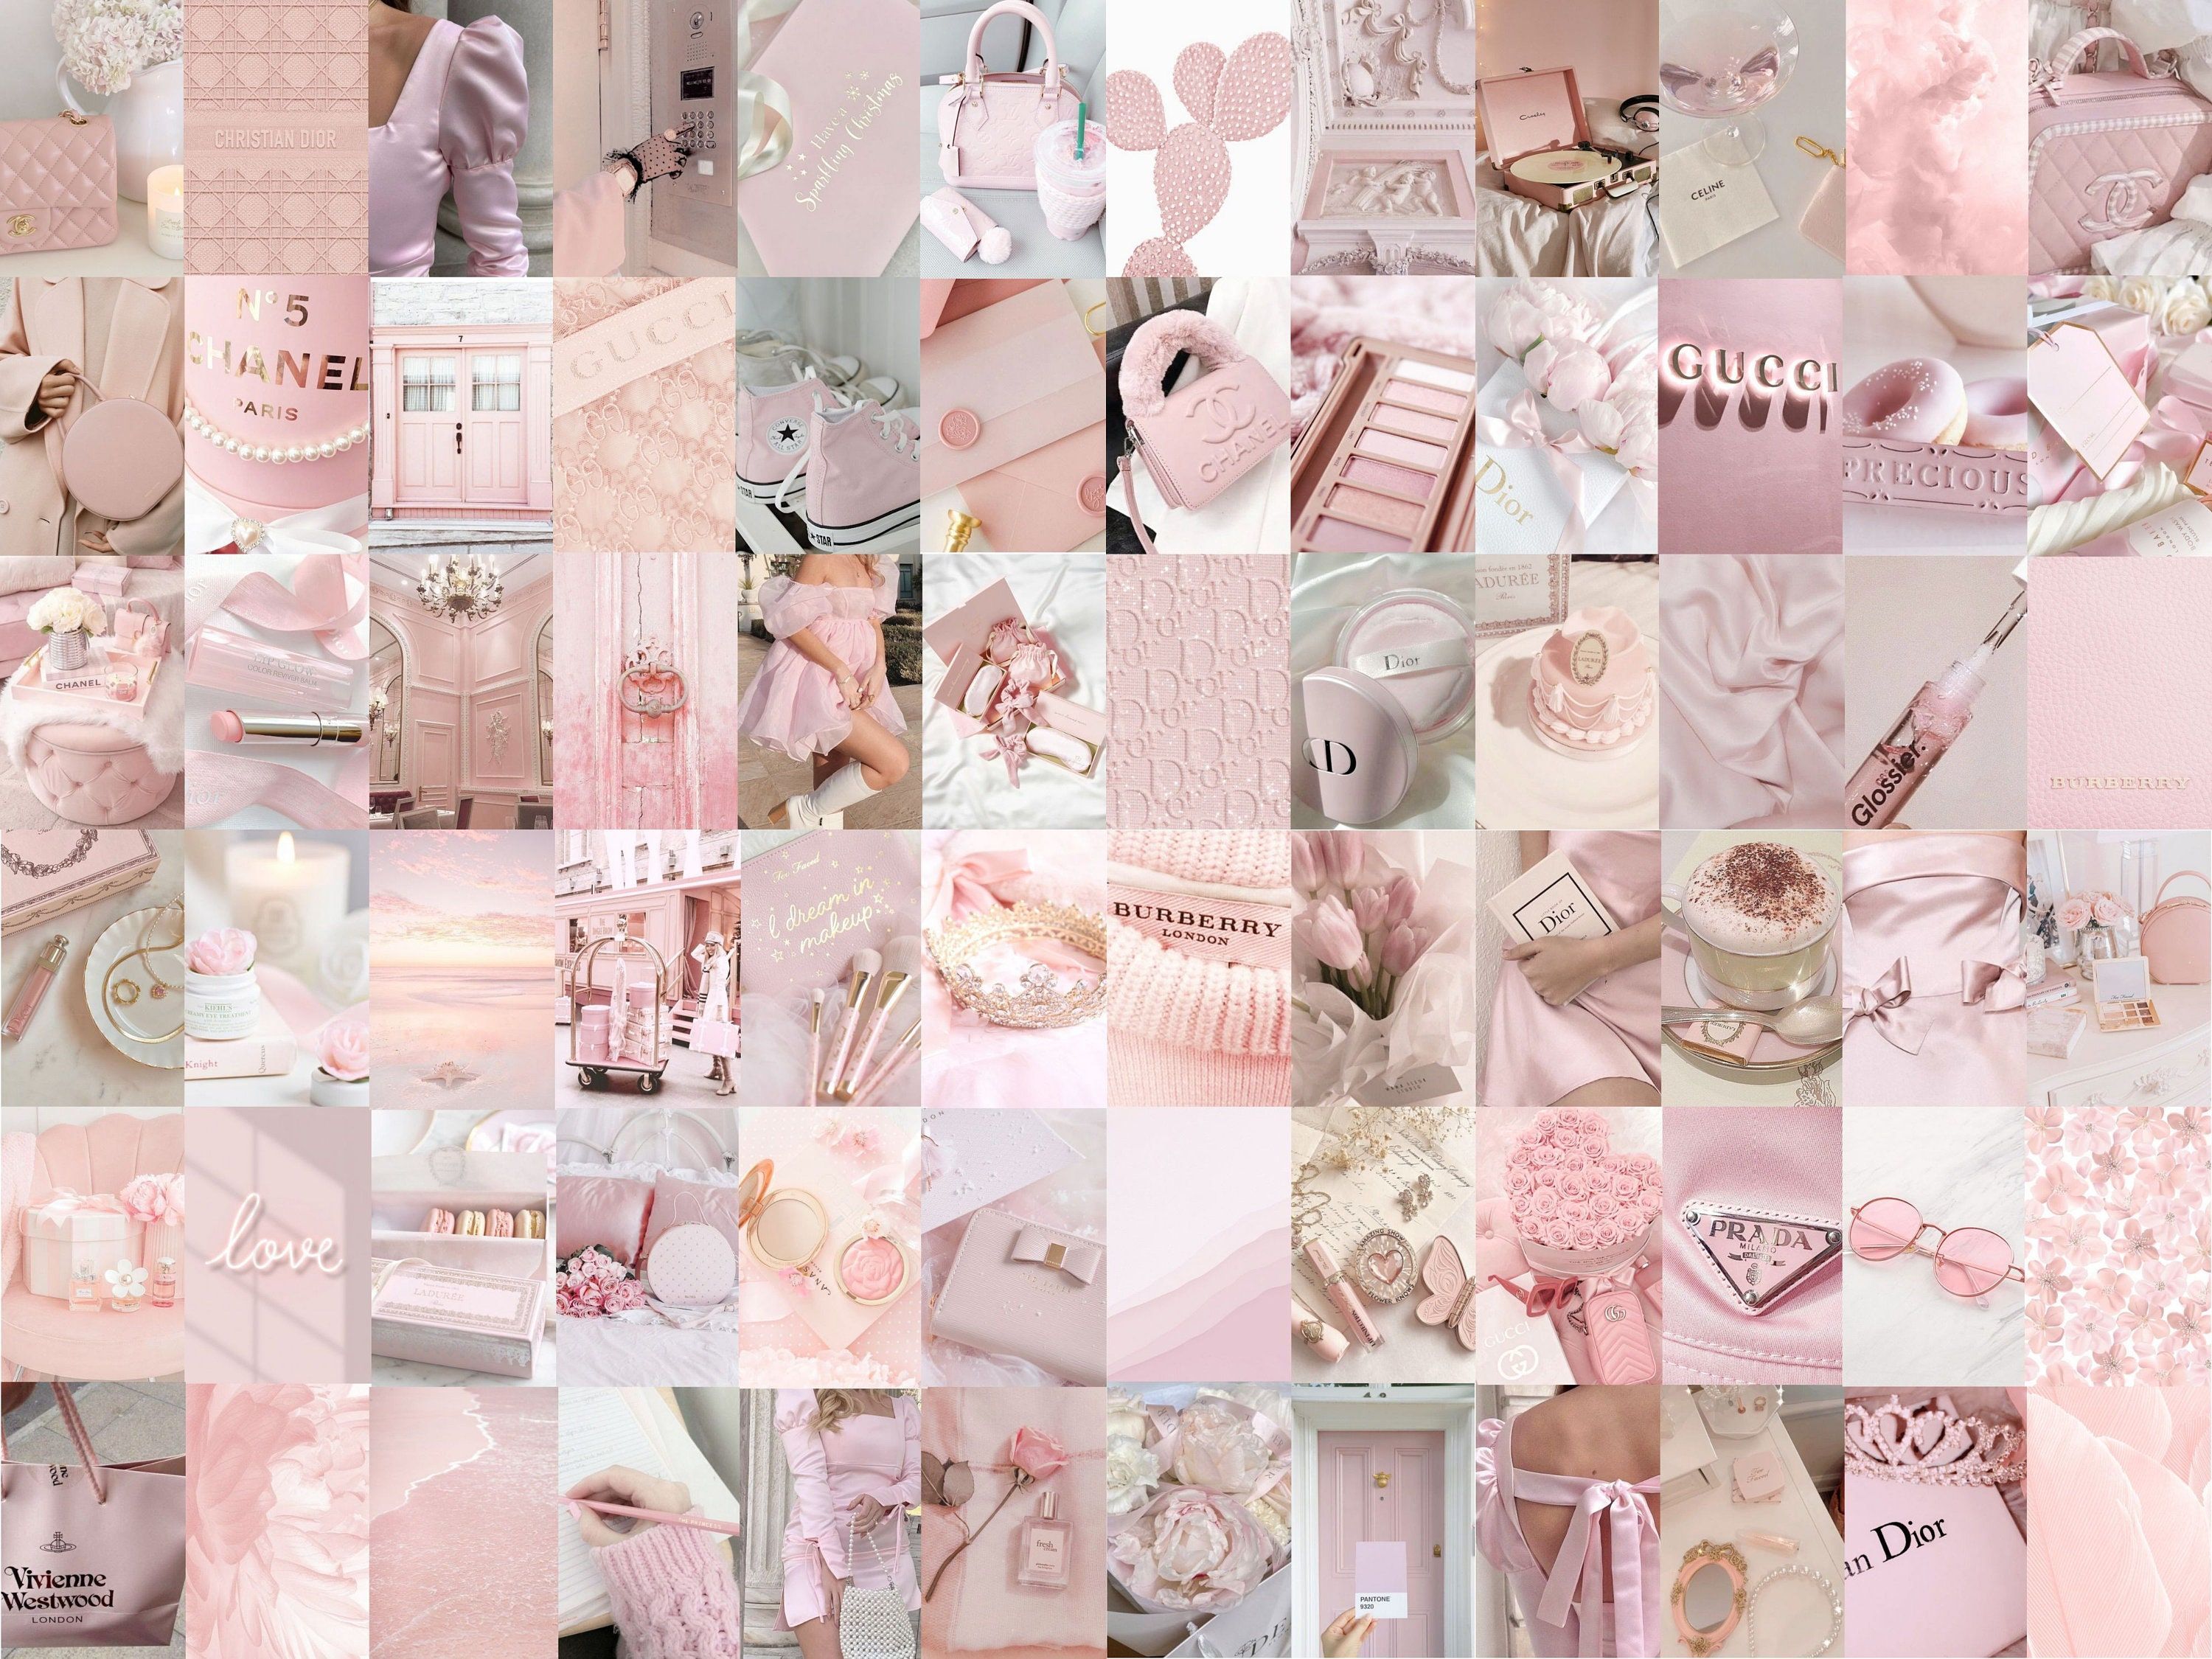 Aesthetic collage pink, aesthetic collage background, aesthetic collage wallpaper, aesthetic collage pictures, aesthetic collage ideas, aesthetic collage aesthetic, aesthetic collage aesthetic, aesthetic collage aesthetic, aesthetic collage aesthetic, aesthetic collage aesthetic, aesthetic collage aesthetic, aesthetic collage aesthetic, aesthetic collage aesthetic, aesthetic collage aesthetic, aesthetic collage aesthetic, aesthetic collage aesthetic, aesthetic collage aesthetic, aesthetic collage aesthetic, aesthetic collage aesthetic, aesthetic collage aesthetic, aesthetic collage aesthetic, aesthetic collage aesthetic, aesthetic collage aesthetic, aesthetic collage aesthetic, aesthetic collage aesthetic, aesthetic collage aesthetic, aesthetic collage aesthetic, aesthetic collage aesthetic, aesthetic collage aesthetic, aesthetic collage aesthetic, aesthetic collage aesthetic, aesthetic collage aesthetic, aesthetic collage aesthetic, aesthetic collage aesthetic, aesthetic collage aesthetic, aesthetic collage aesthetic, aesthetic collage aesthetic, aesthetic collage aesthetic, aesthetic collage aesthetic, aesthetic collage aesthetic, aesthetic collage aesthetic, aesthetic collage aesthetic, aesthetic collage aesthetic, aesthetic collage aesthetic, aesthetic collage aesthetic, aesthetic collage aesthetic, aesthetic collage aesthetic, aesthetic collage aesthetic, aesthetic collage aesthetic, aesthetic collage aesthetic, aesthetic collage aesthetic, aesthetic collage aesthetic, aesthetic collage aesthetic, aesthetic collage aesthetic, aesthetic collage aesthetic, aesthetic collage aesthetic, aesthetic collage aesthetic, aesthetic collage aesthetic, aesthetic collage aesthetic, aesthetic collage aesthetic, aesthetic collage aesthetic, aesthetic collage aesthetic, aesthetic collage aesthetic, aesthetic collage aesthetic, aesthetic collage aesthetic, aesthetic collage aesthetic, aesthetic collage aesthetic, aesthetic collage aesthetic, aesthetic collage aesthetic, aesthetic collage aesthetic, aesthetic collage aesthetic, aesthetic collage aesthetic, aesthetic collage aesthetic, aesthetic collage aesthetic, aesthetic collage aesthetic, aesthetic collage aesthetic, aesthetic collage aesthetic, aesthetic collage aesthetic, aesthetic collage aesthetic, aesthetic collage aesthetic, aesthetic collage aesthetic, aesthetic collage aesthetic, aesthetic collage aesthetic, aesthetic collage aesthetic, aesthetic collage aesthetic, aesthetic collage aesthetic, aesthetic collage aesthetic, aesthetic collage aesthetic, aesthetic collage aesthetic, aesthetic collage aesthetic, aesthetic collage aesthetic, aesthetic collage aesthetic, aesthetic collage aesthetic, aesthetic collage aesthetic, aesthetic collage aesthetic, aesthetic collage aesthetic, aesthetic collage aesthetic, aesthetic collage aesthetic, aesthetic collage aesthetic, aesthetic collage aesthetic, aesthetic collage aesthetic, aesthetic collage aesthetic, aesthetic collage aesthetic, aesthetic collage aesthetic, aesthetic collage aesthetic, aesthetic collage aesthetic, aesthetic collage aesthetic, aesthetic collage aesthetic, aesthetic collage aesthetic, aesthetic collage aesthetic, aesthetic collage aesthetic, aesthetic collage aesthetic, aesthetic collage aesthetic, aesthetic collage aesthetic, aesthetic collage aesthetic, aesthetic collage aesthetic, aesthetic collage aesthetic, aesthetic collage aesthetic, aesthetic collage aesthetic, aesthetic collage aesthetic, aesthetic collage aesthetic, aesthetic collage aesthetic, aesthetic collage aesthetic, aesthetic collage aesthetic, aesthetic collage aesthetic, aesthetic collage aesthetic, aesthetic collage aesthetic, aesthetic collage - Pink collage, blush, makeup